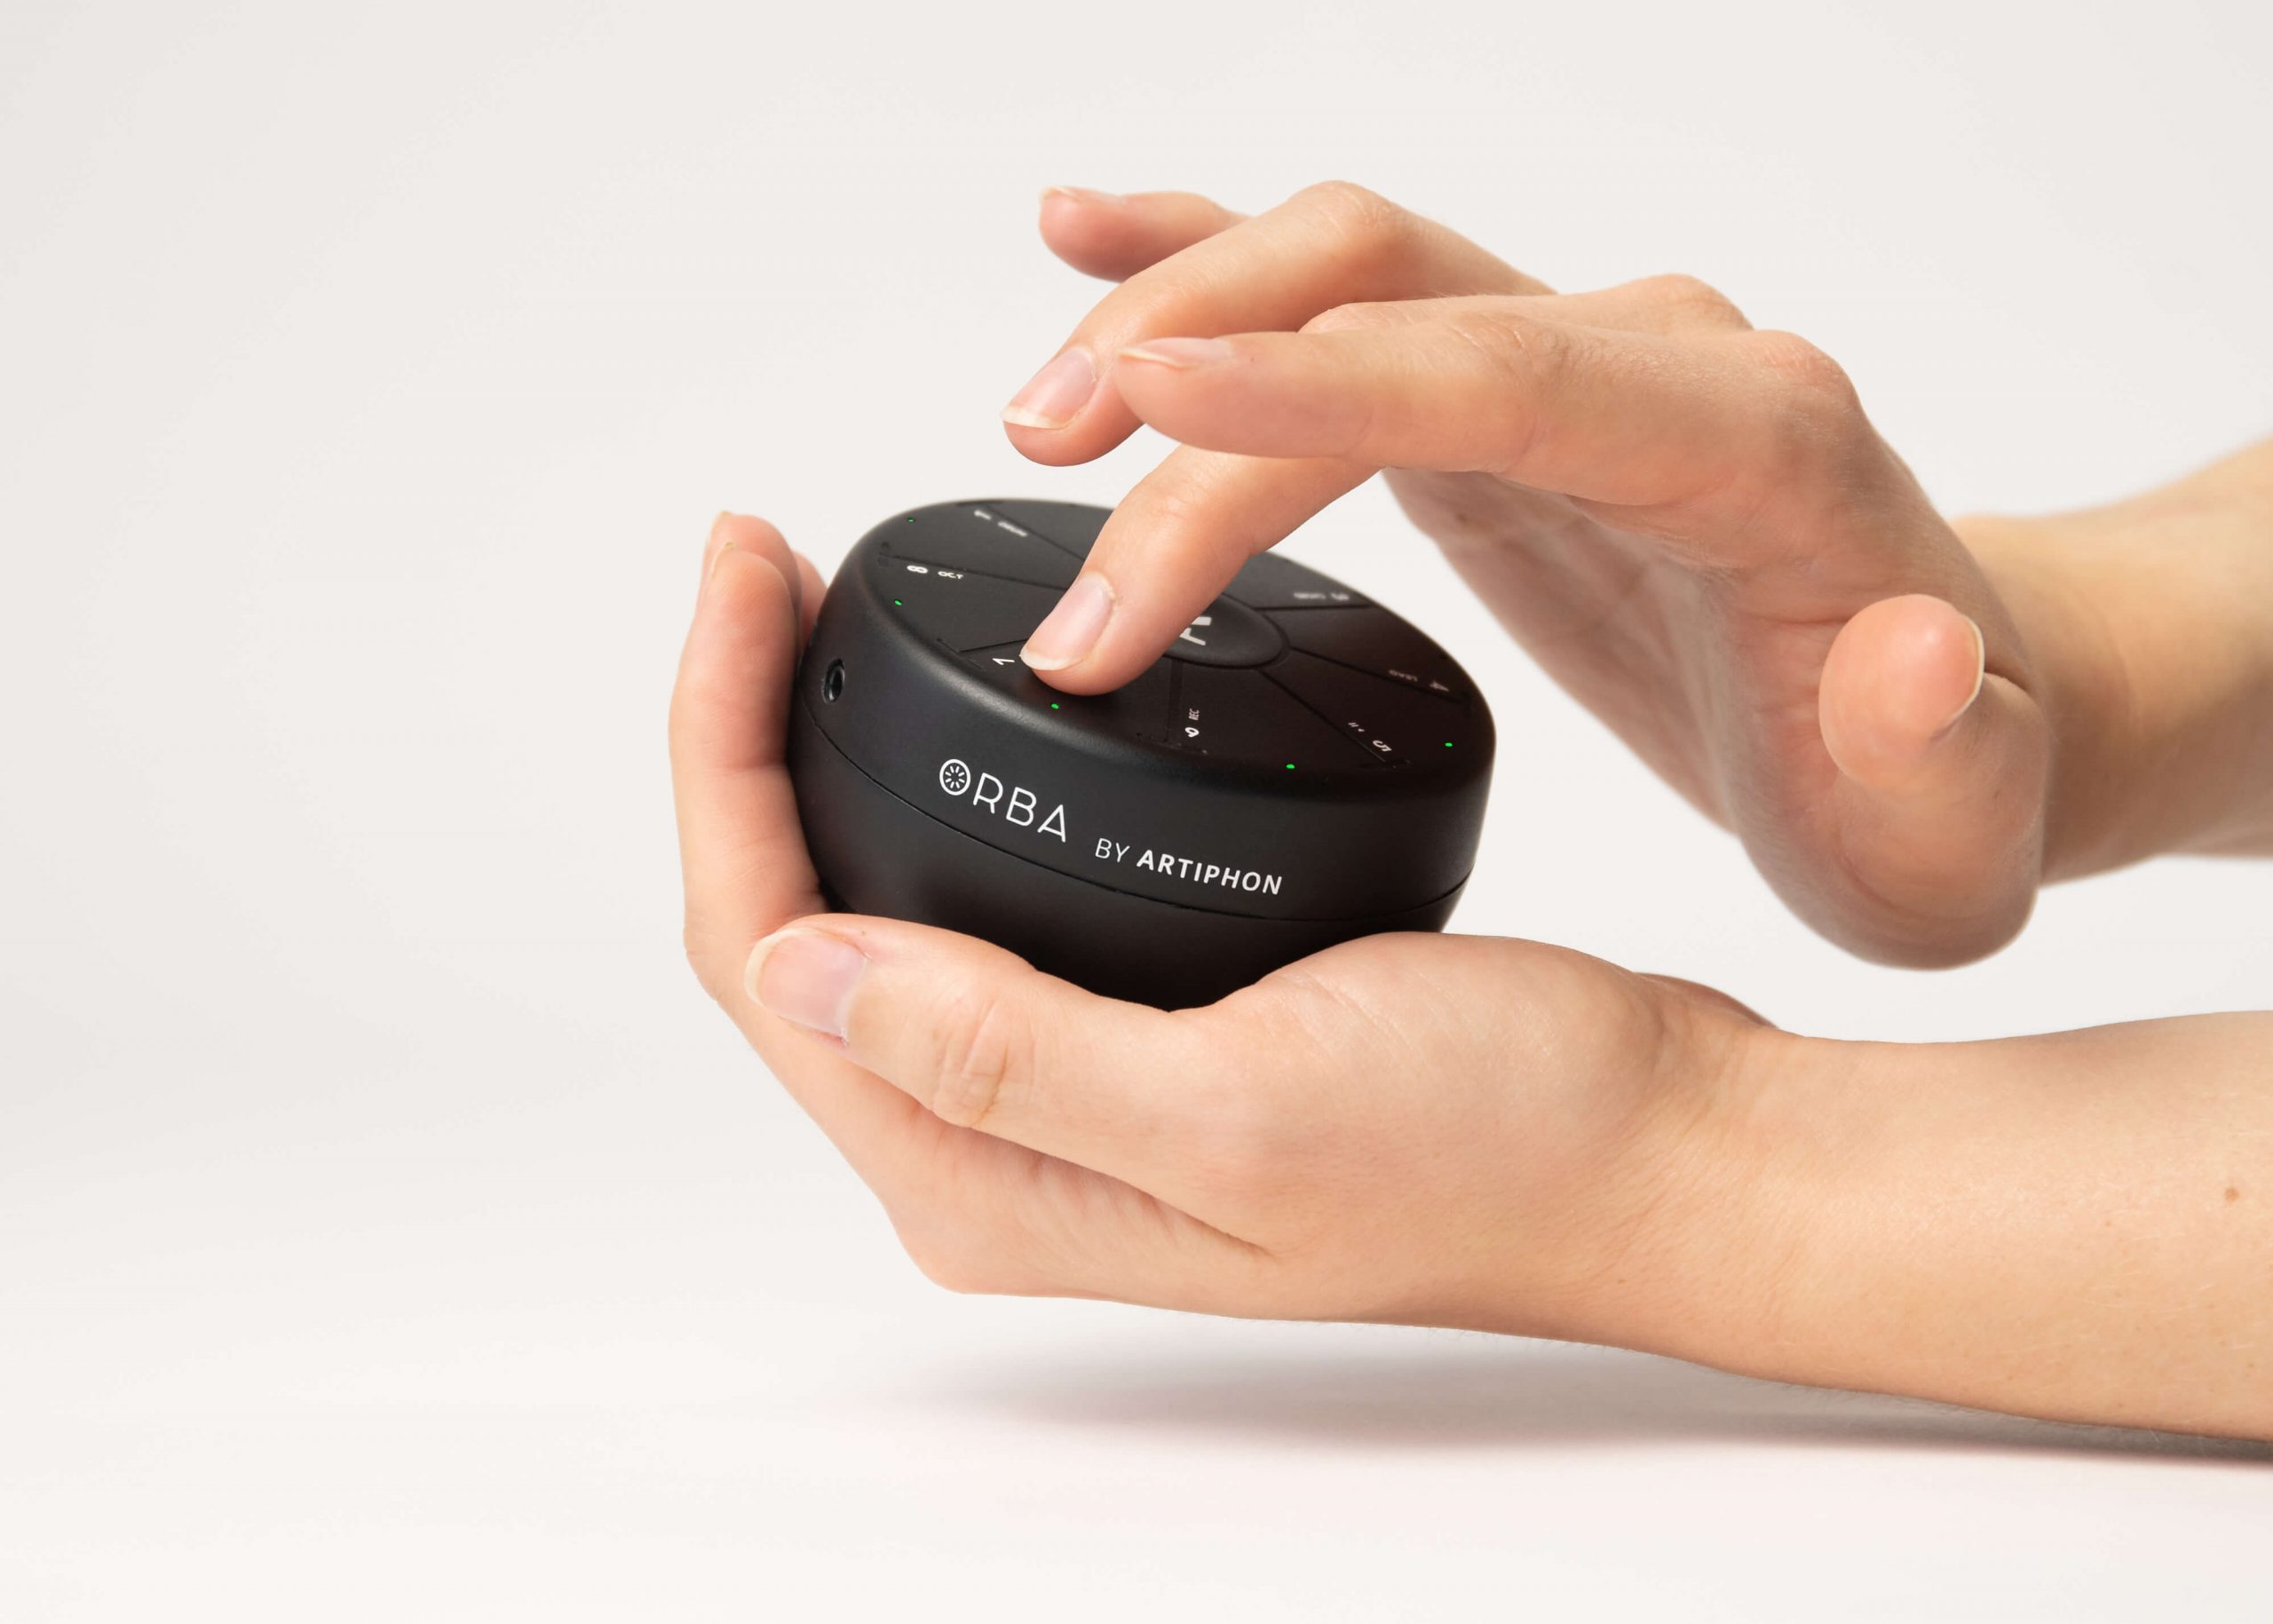 Artiphon Orba is a band in your hand that just raised $1.4M on Kickstarter